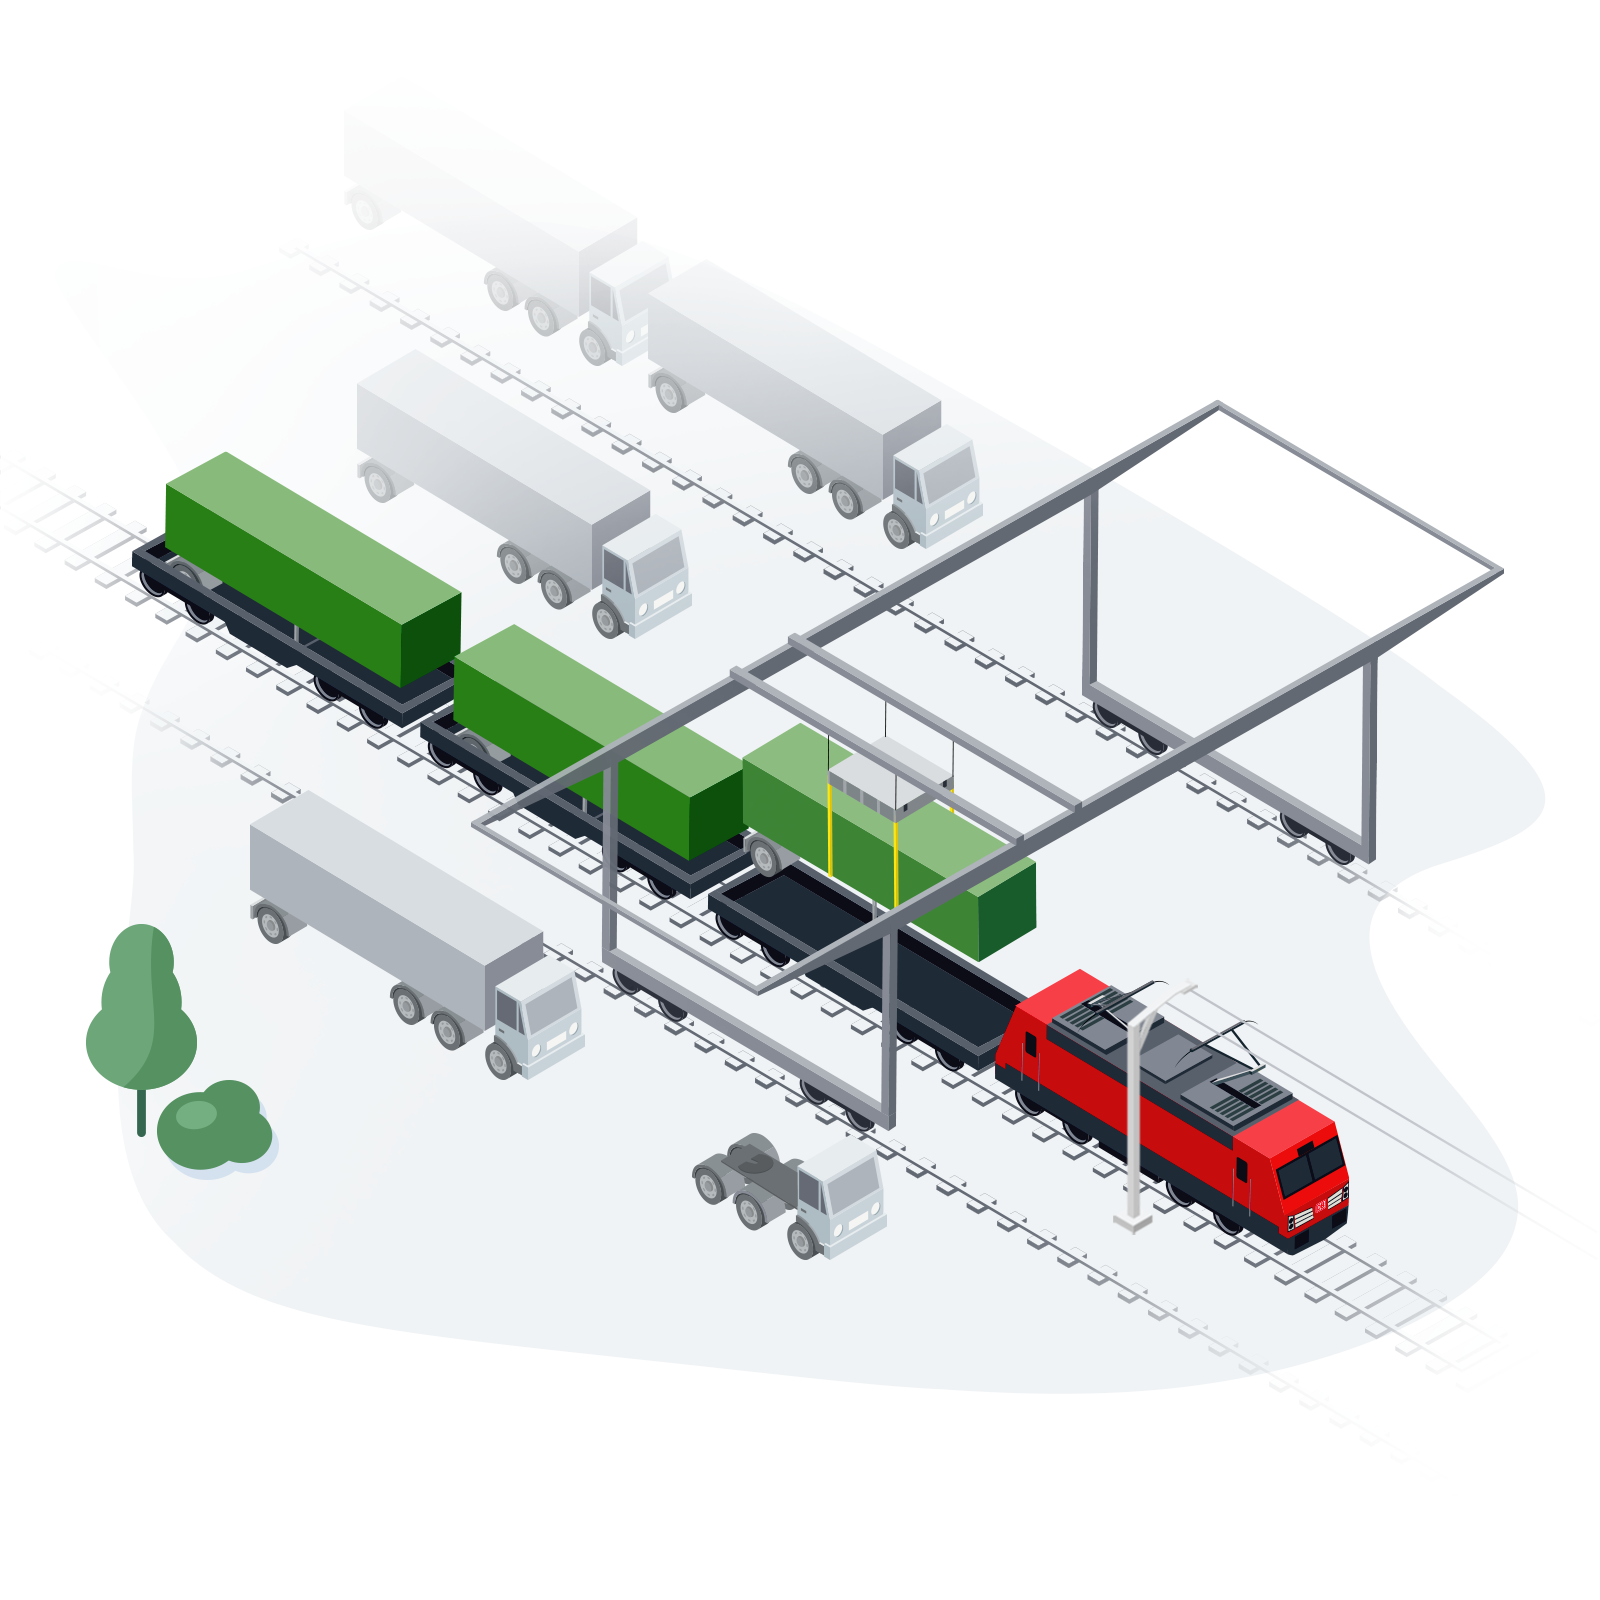 Lorries can also transport by rail.